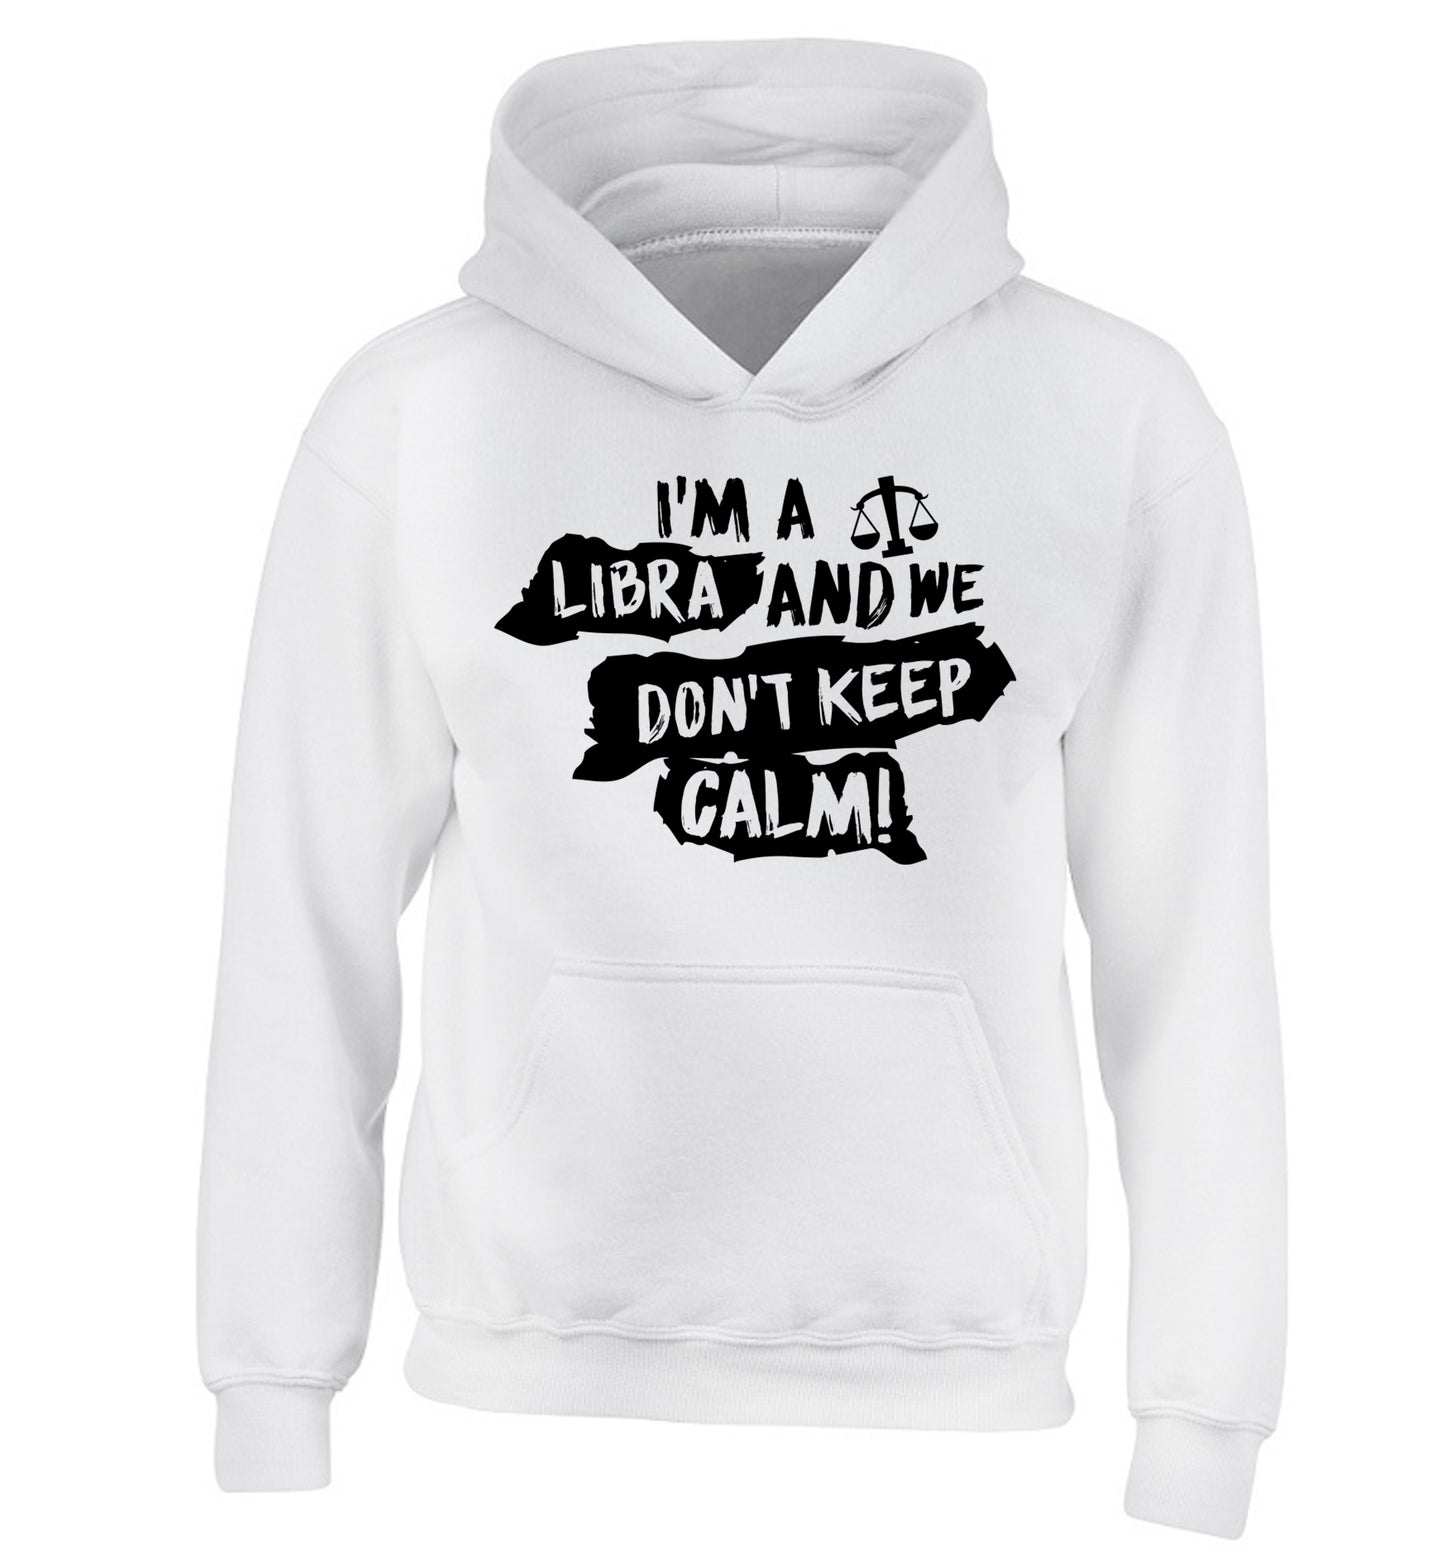 I'm a libra and we don't keep calm children's white hoodie 12-13 Years